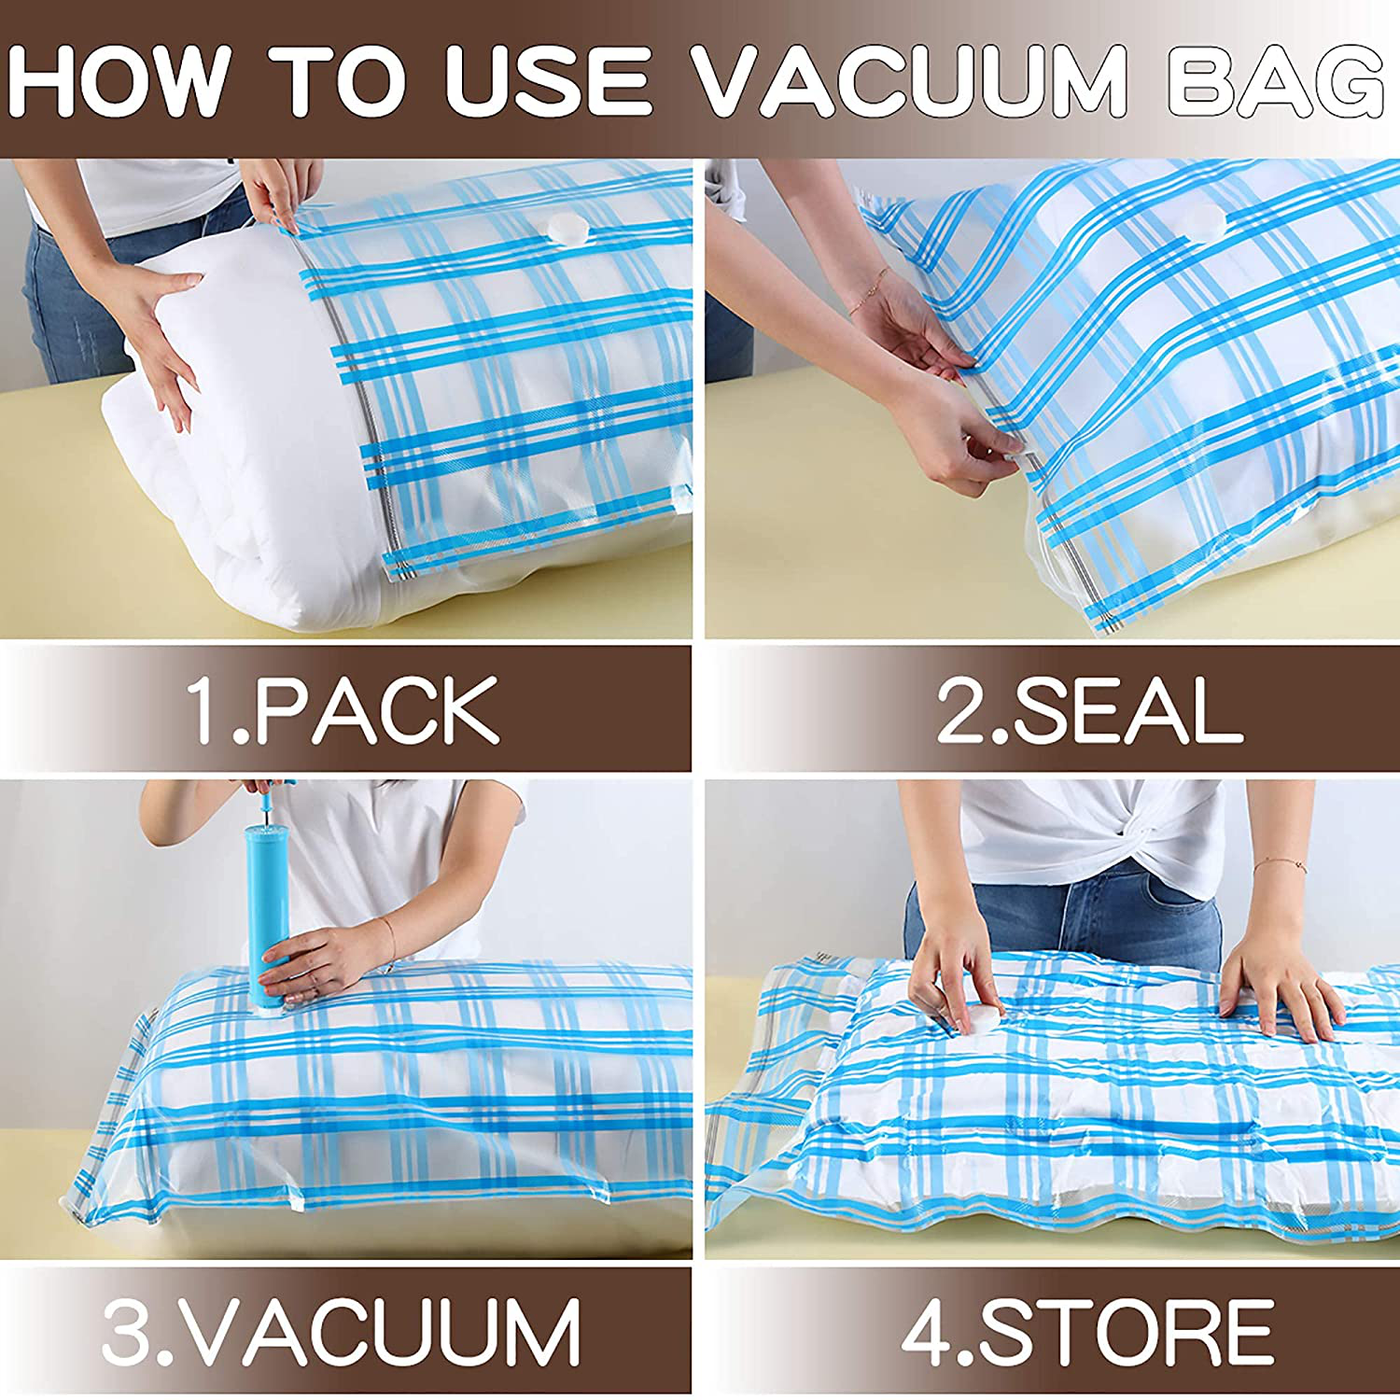 Storage Master Vacuum Storage Bags, 8 Jumbo Vacuum Sealer Space Saver Bags for Clothes, Comforters and Blankets (8 Jumbo)